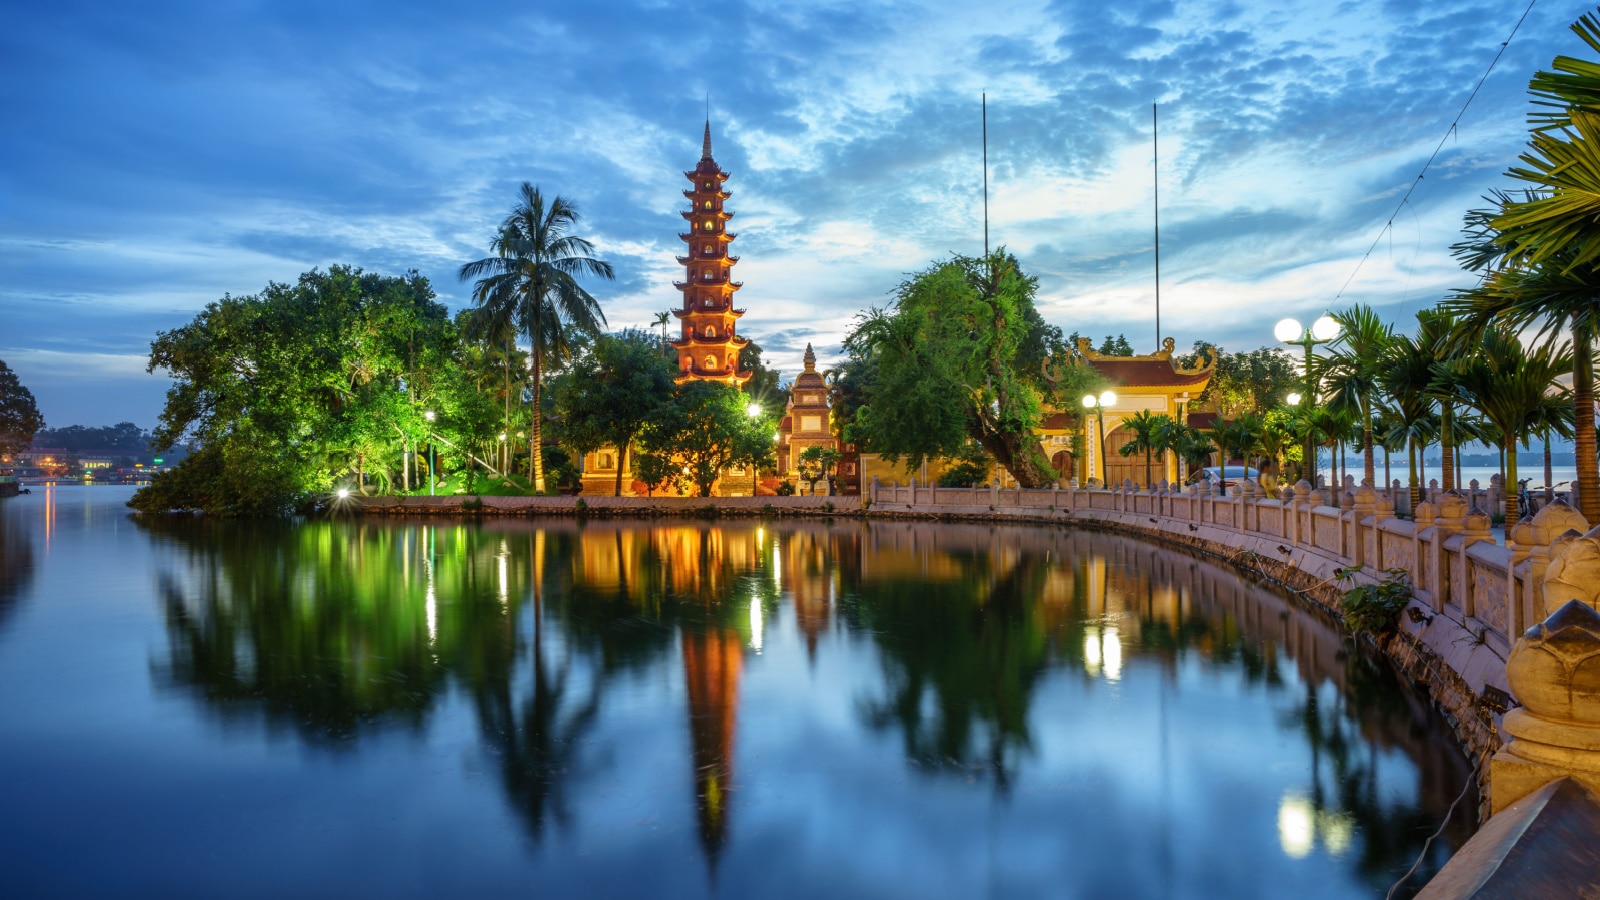 <p>Vietnam has long since been known as an affordable vacation destination, and for good reason. The cities are bustling and bursting with culture, and the scenic areas are absolutely jaw-droppingly beautiful. Just about everything is available at low prices, and you'll be able to have an awesome holiday on a budget.</p>